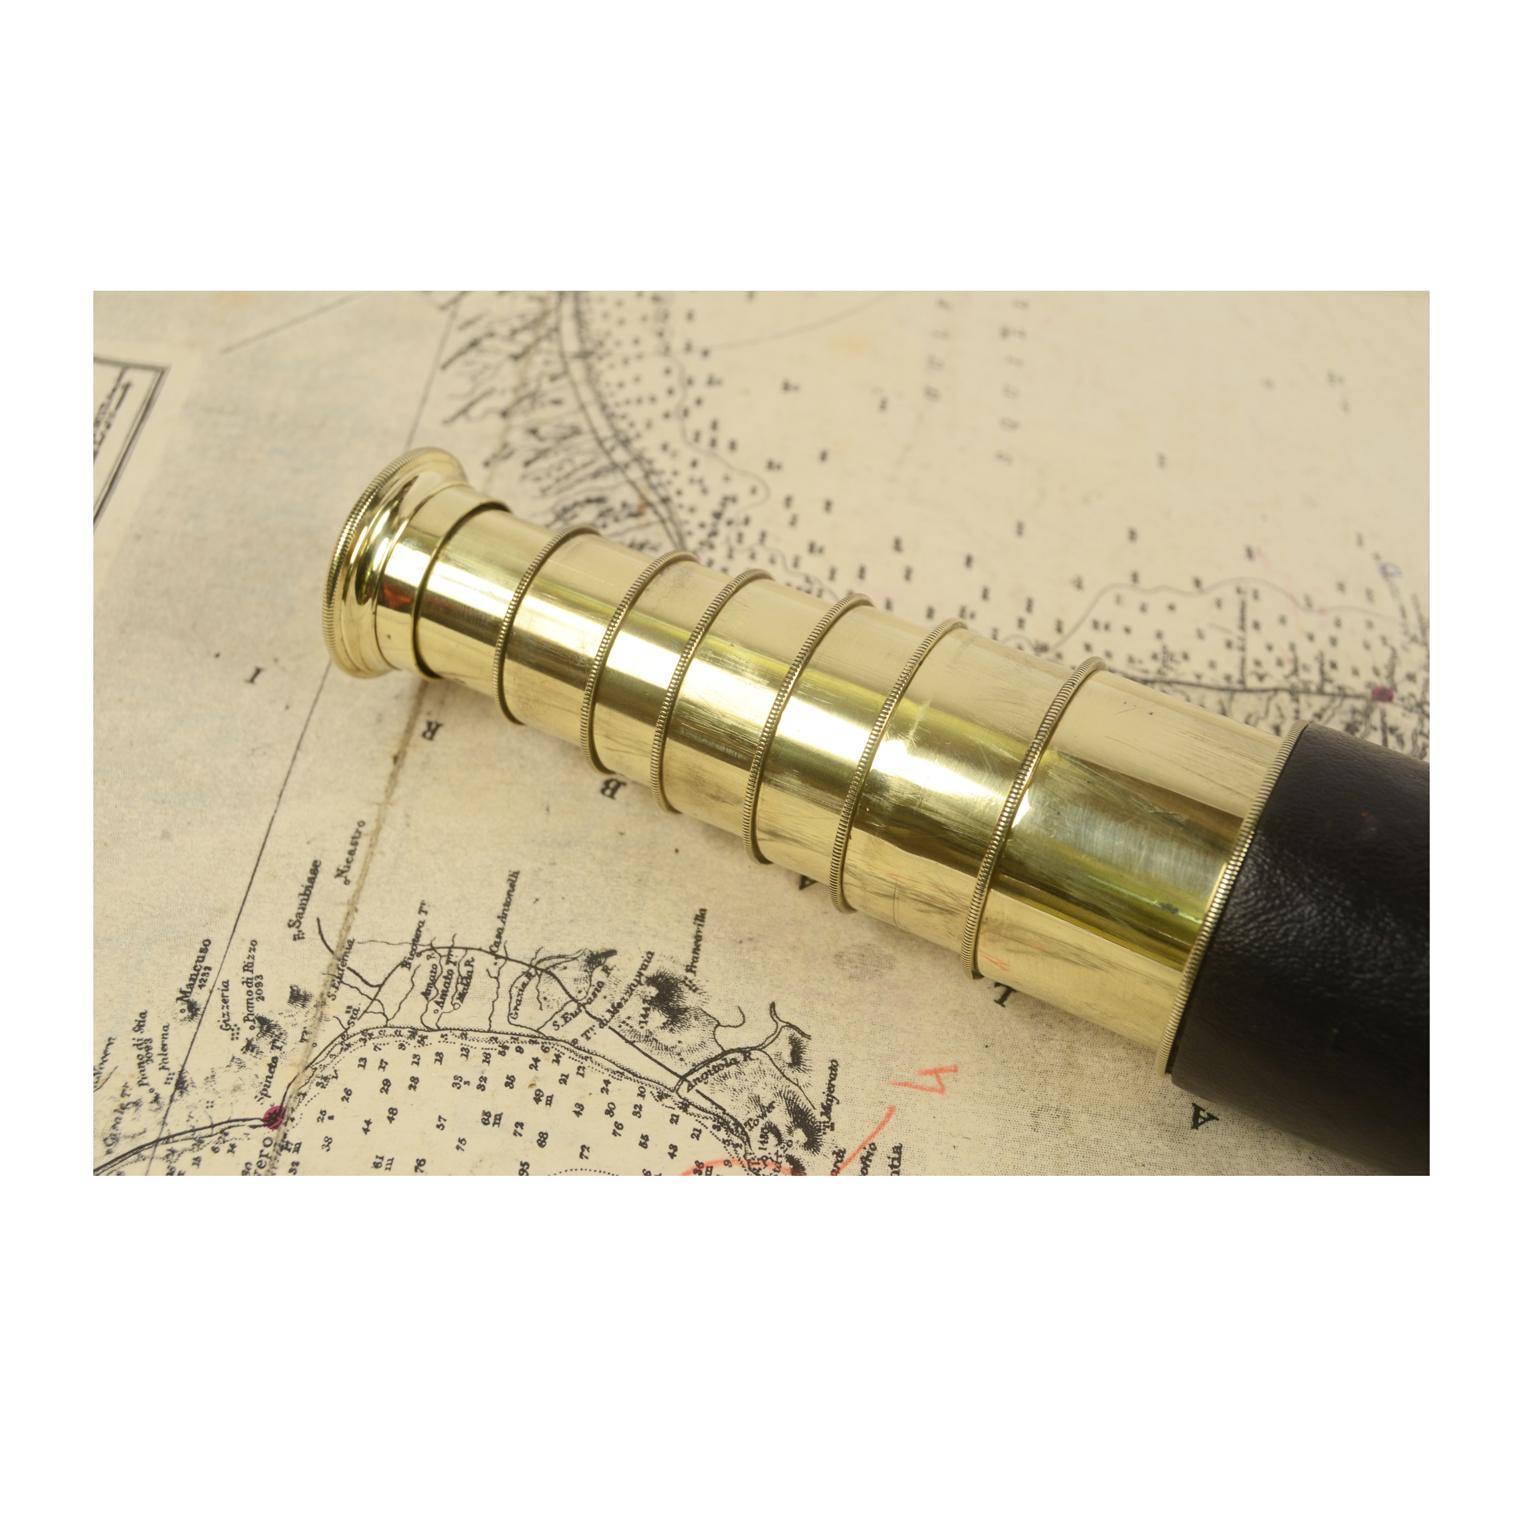 Mid-19th Century Brass Telescope with Leather Handle, UK, Second Half of the 19th Century